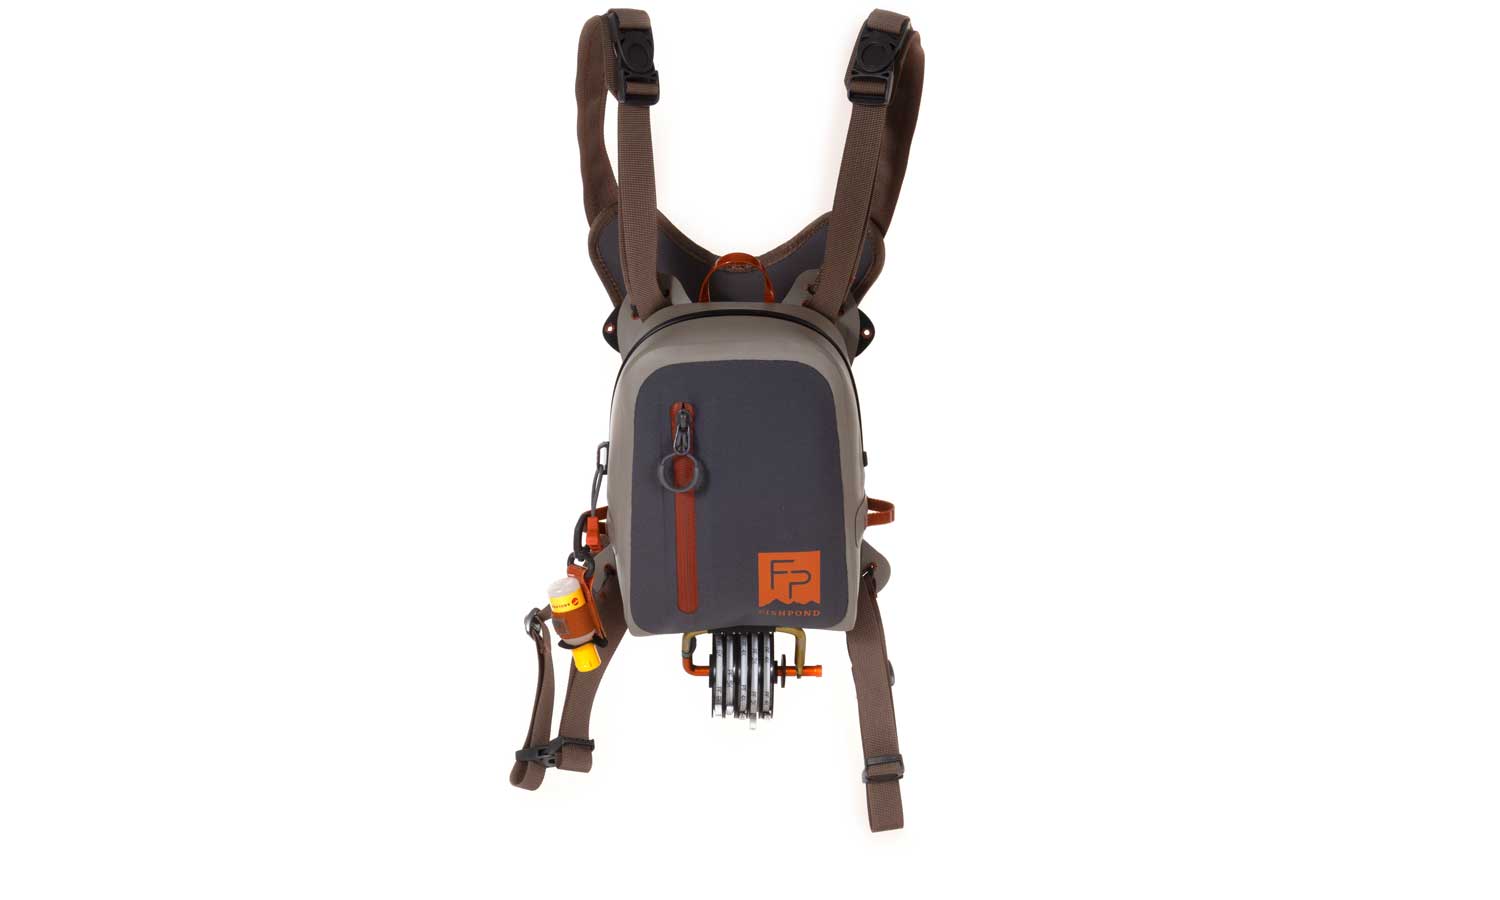 Thunderhead Submersible Chest pack